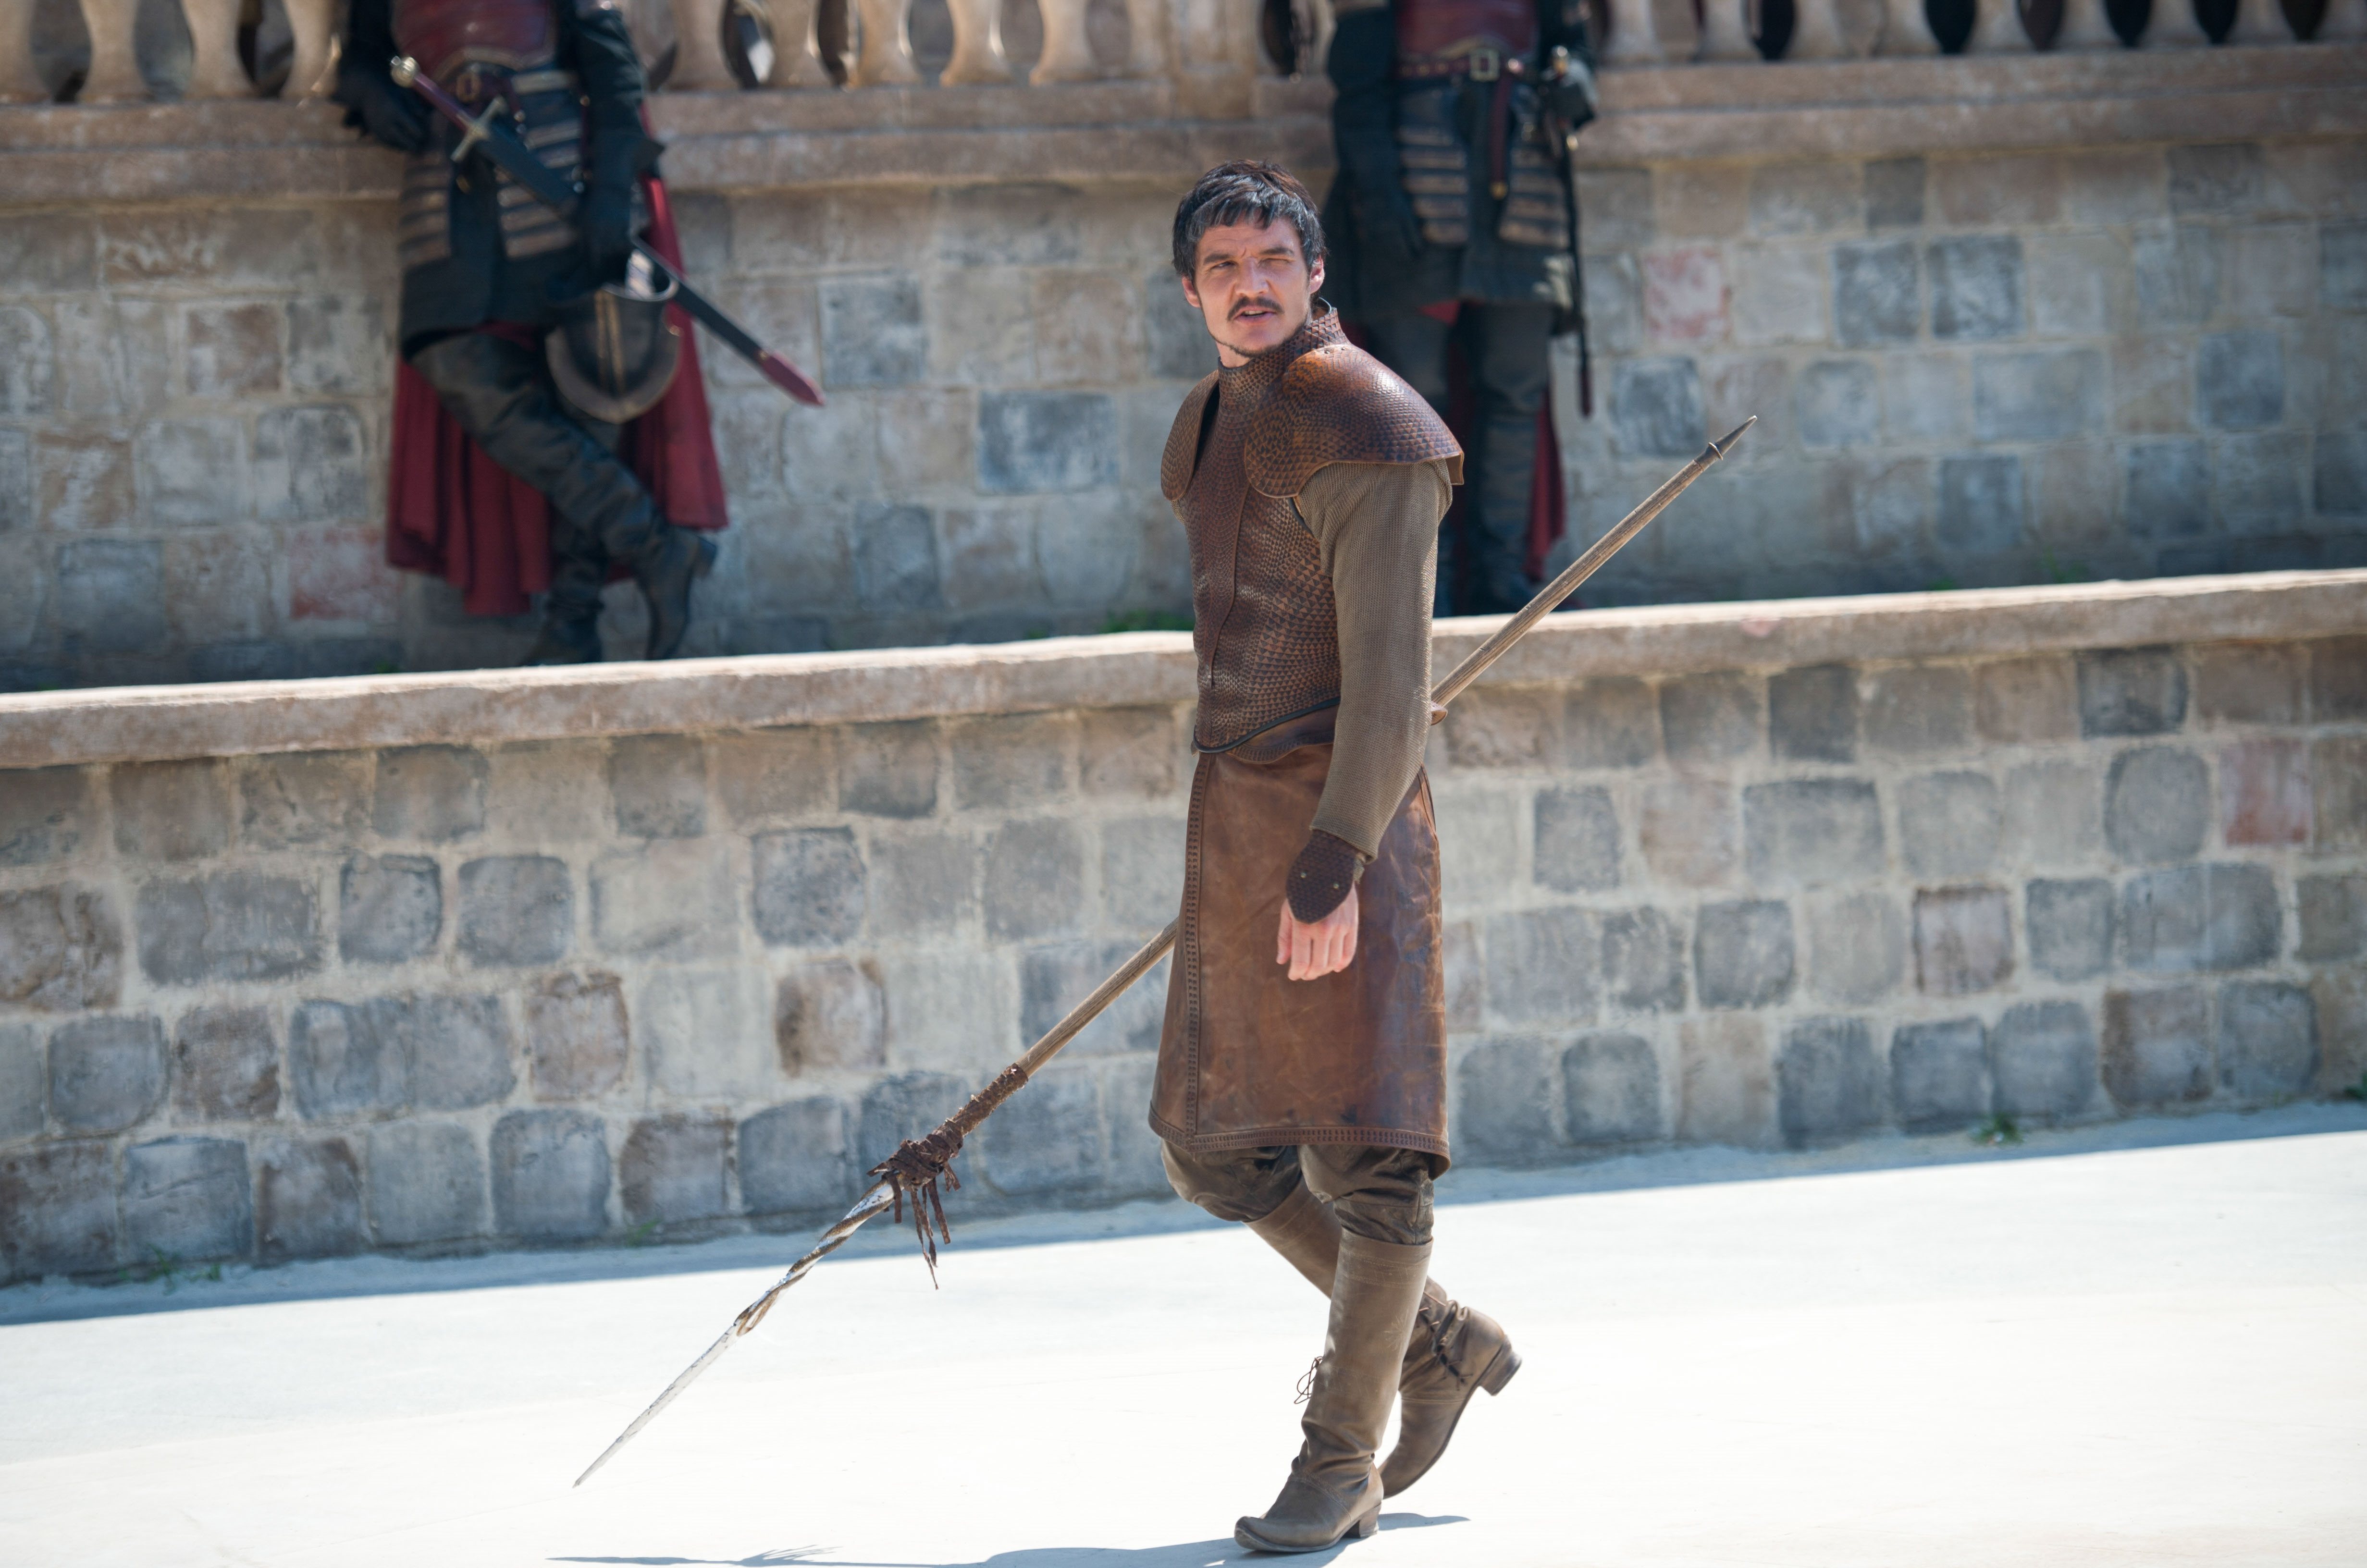 oberyn martell, tv show, game of thrones, pedro pascal